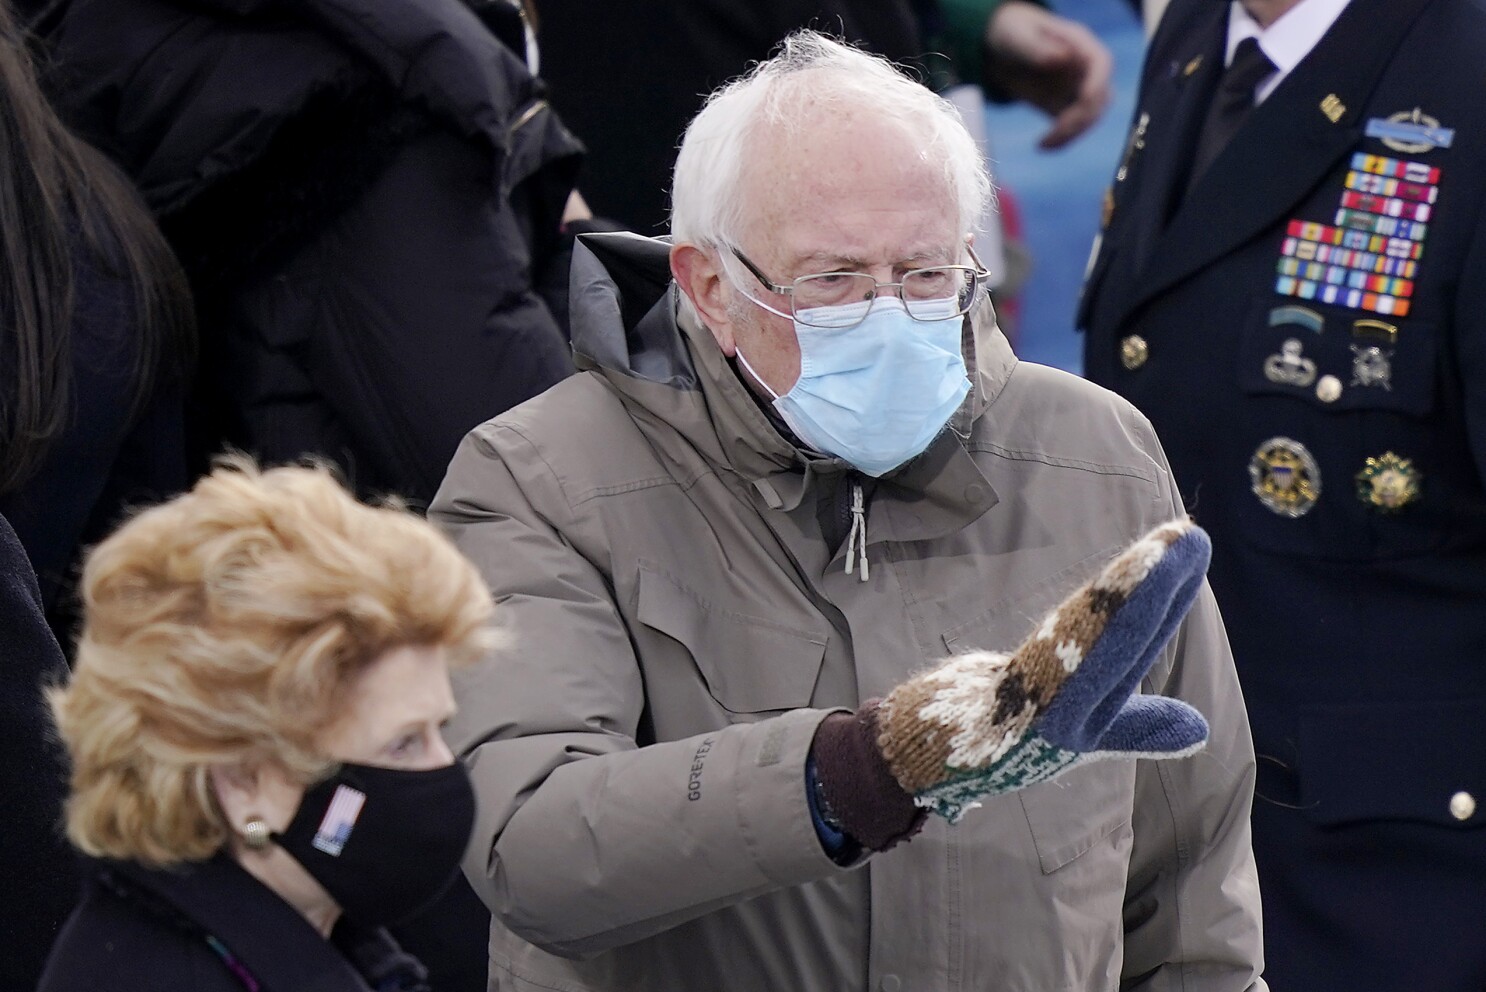 Yes Bernie Sanders Laughs At Those Inauguration Memes Too Los Angeles Times